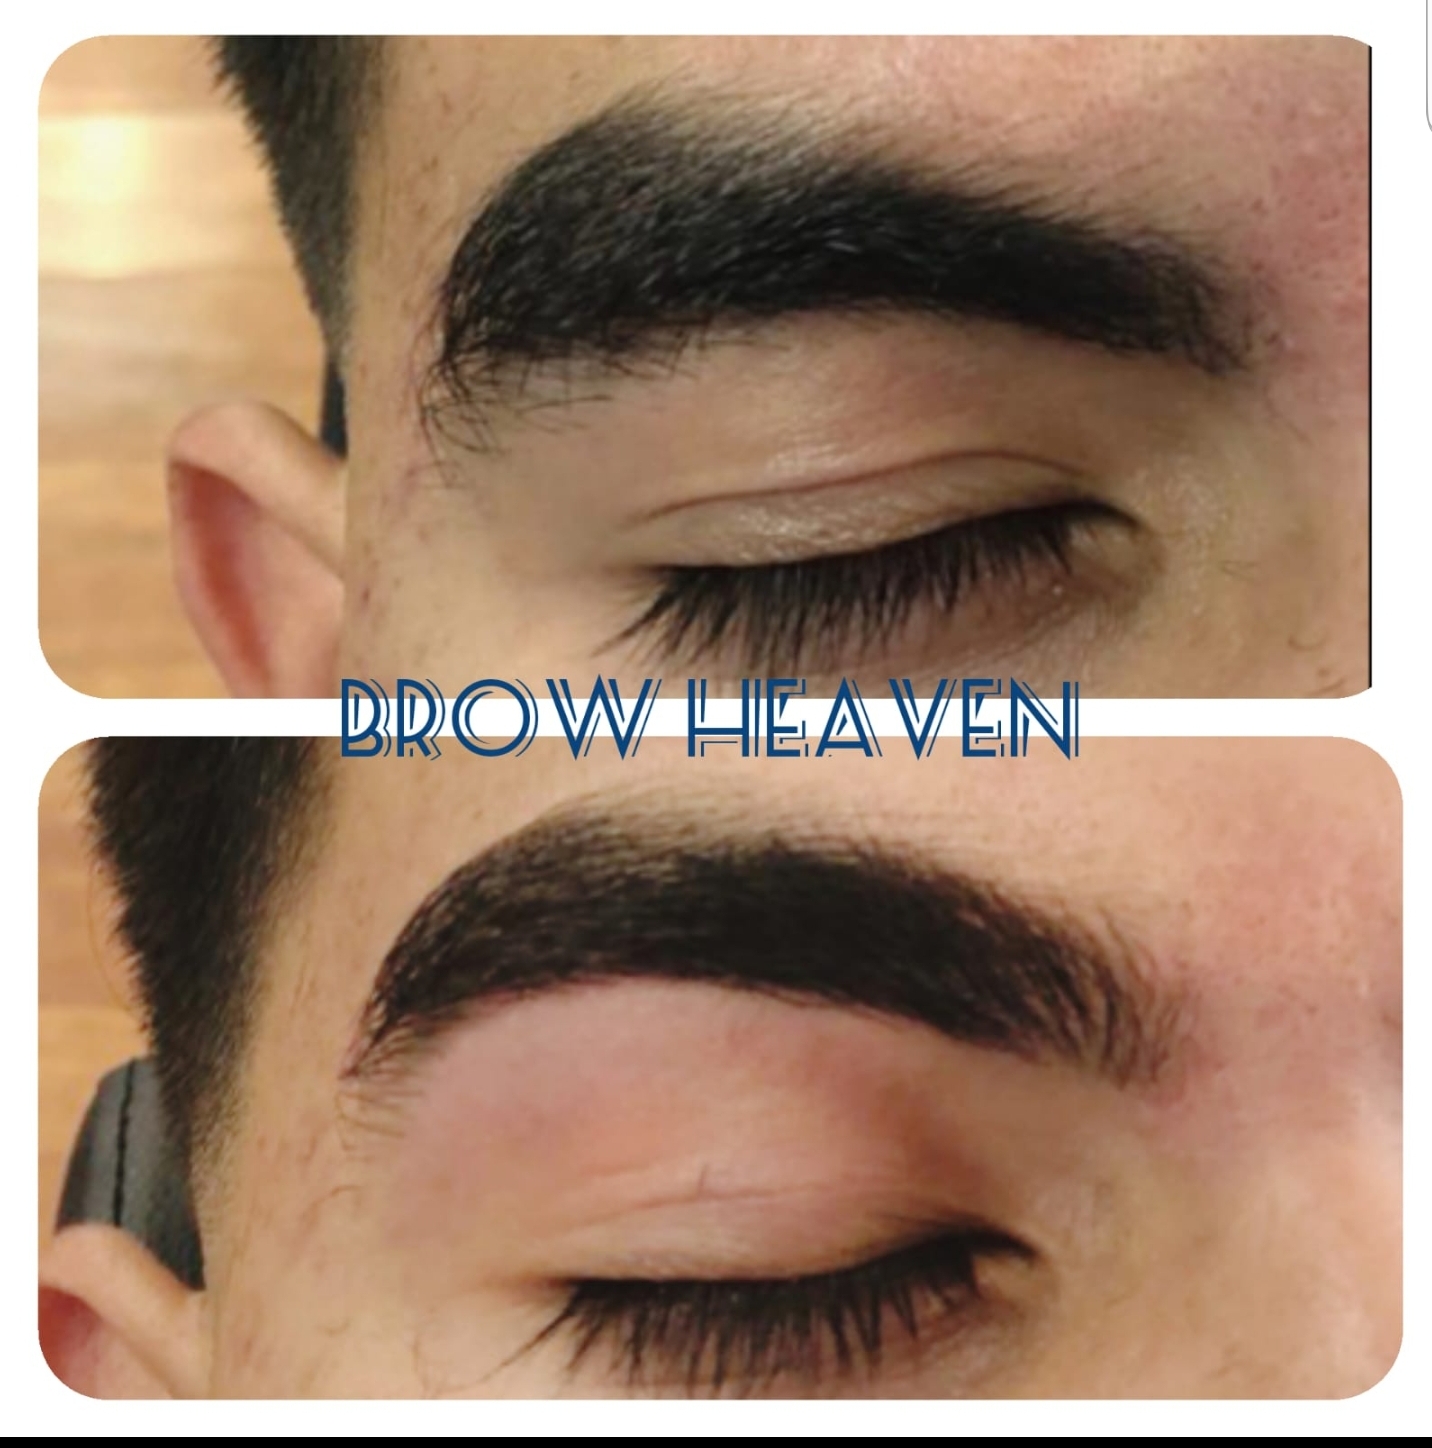 Brow-Heaven-Male-Eyebrow-Client-06.30.2019